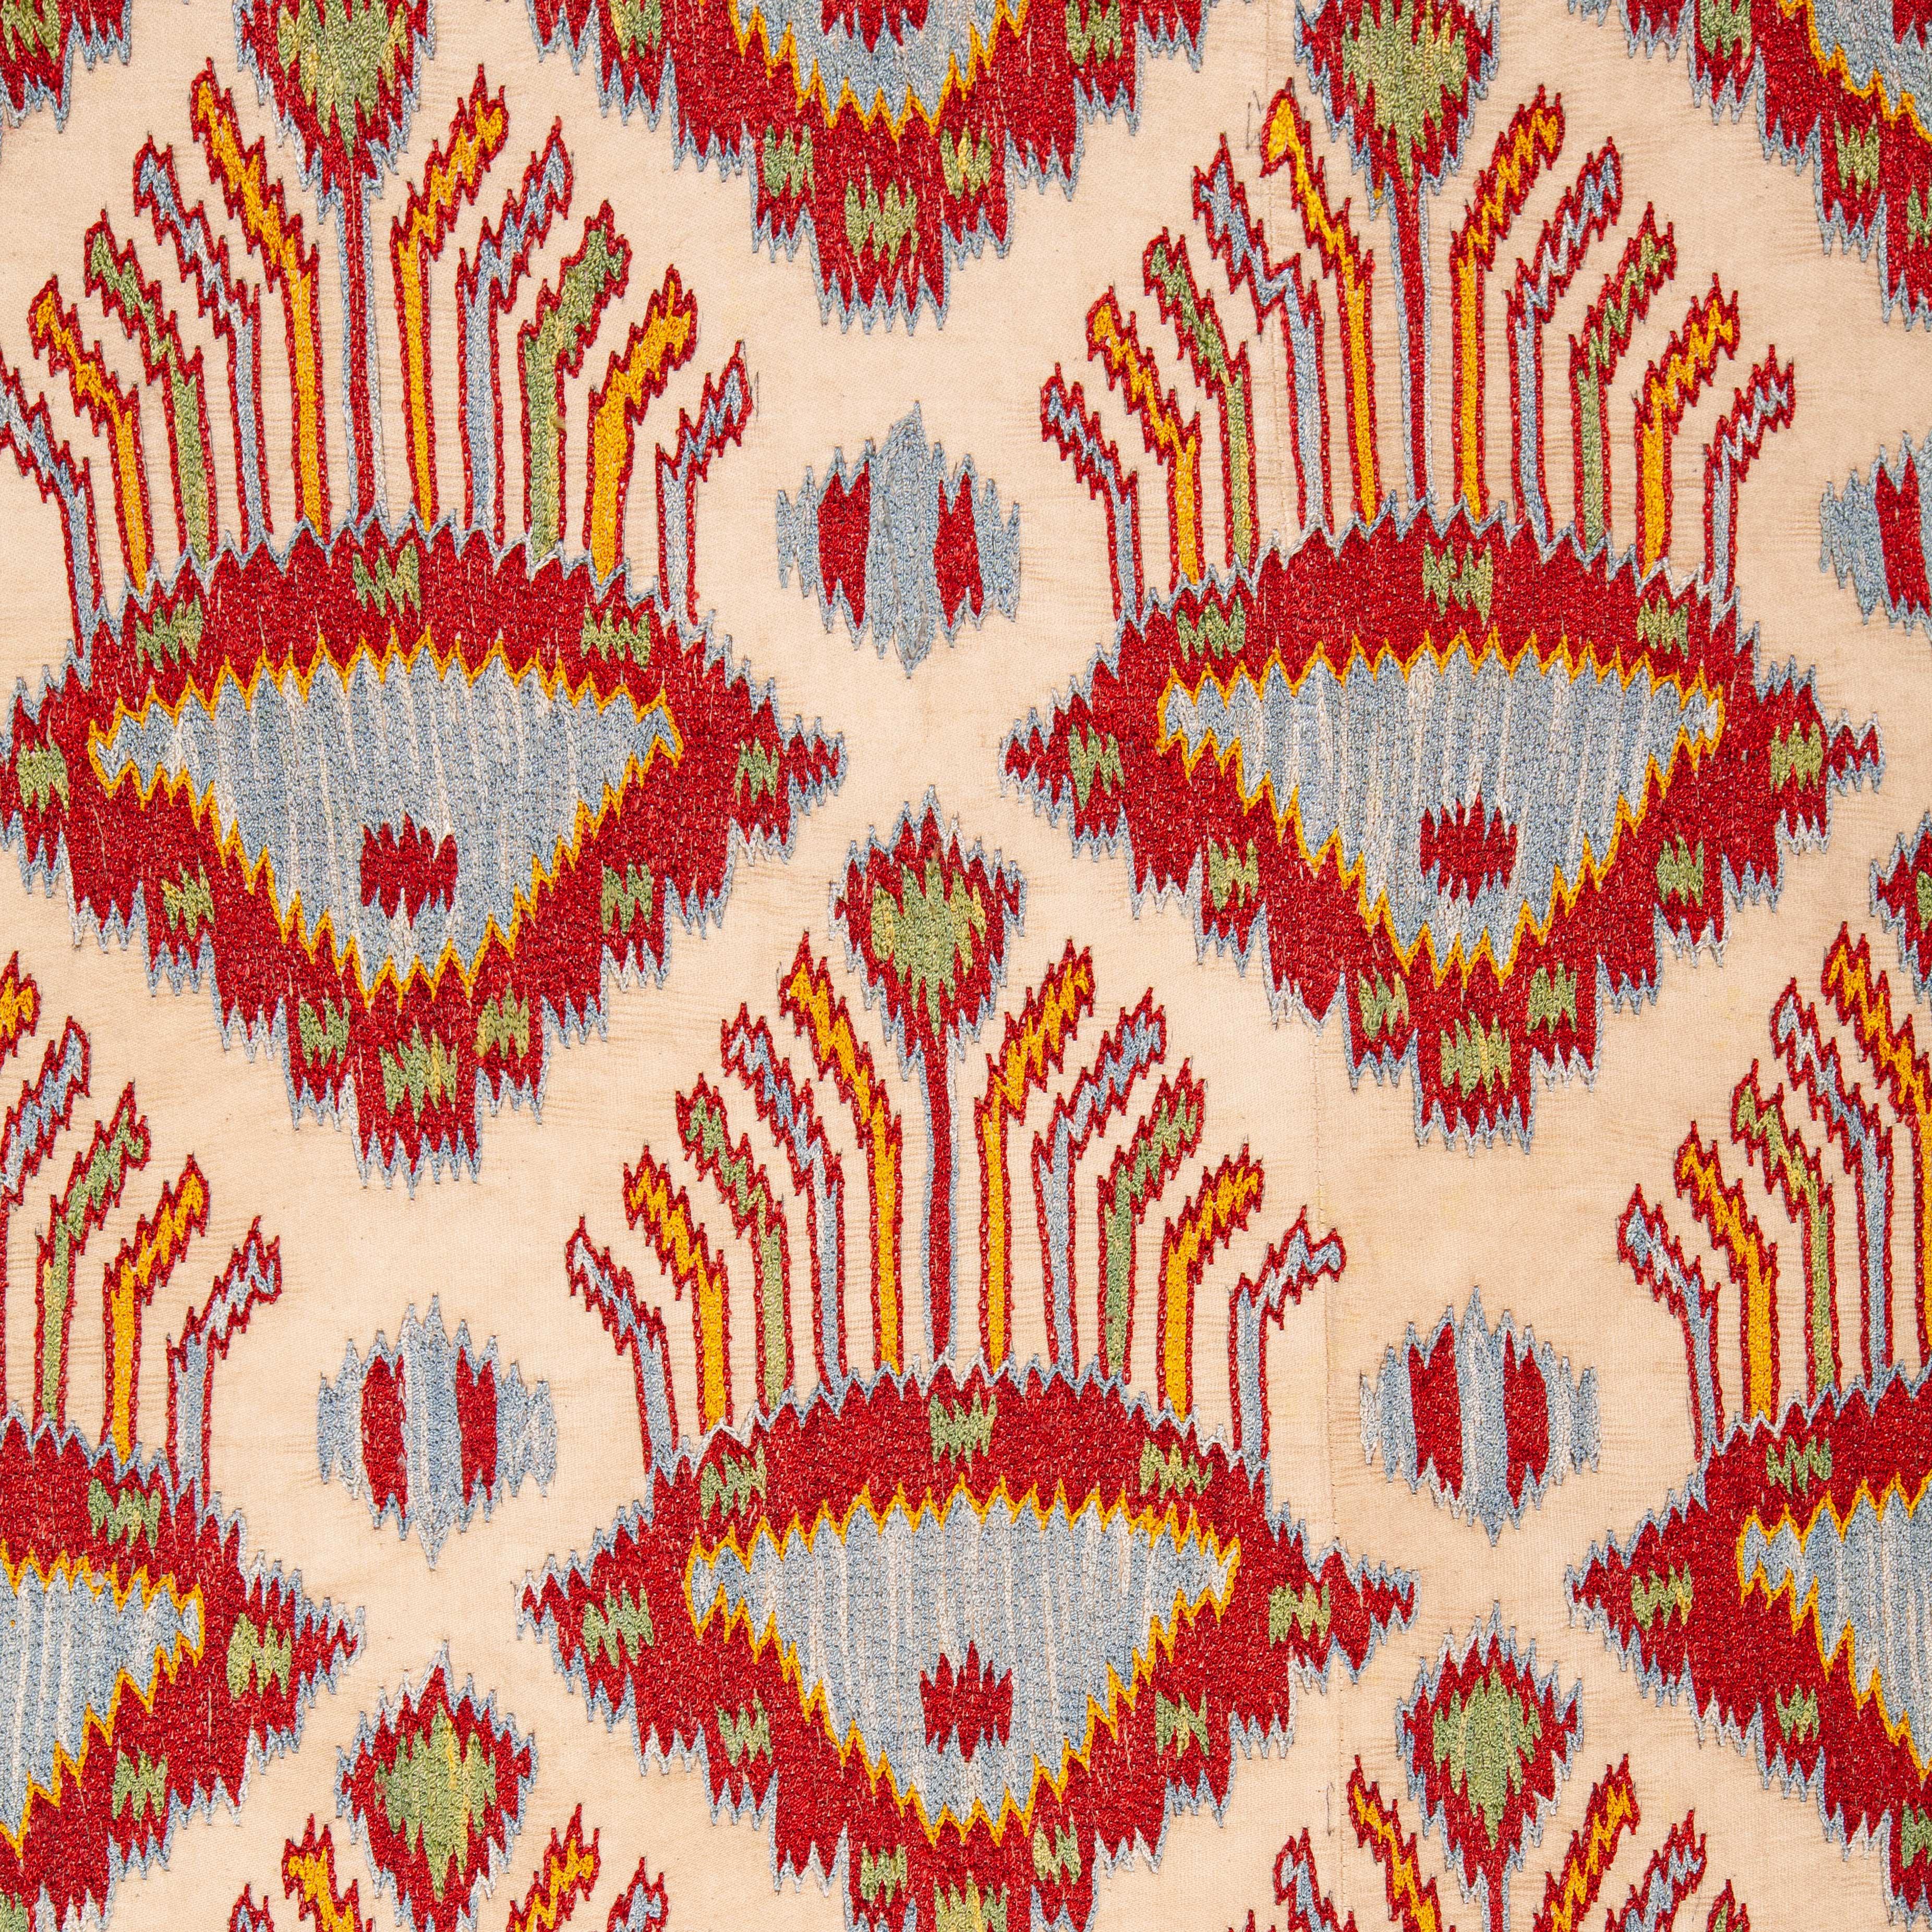 Embroidered Contemporary Silk Suzani Inspired by Ikat Design, 21st Century